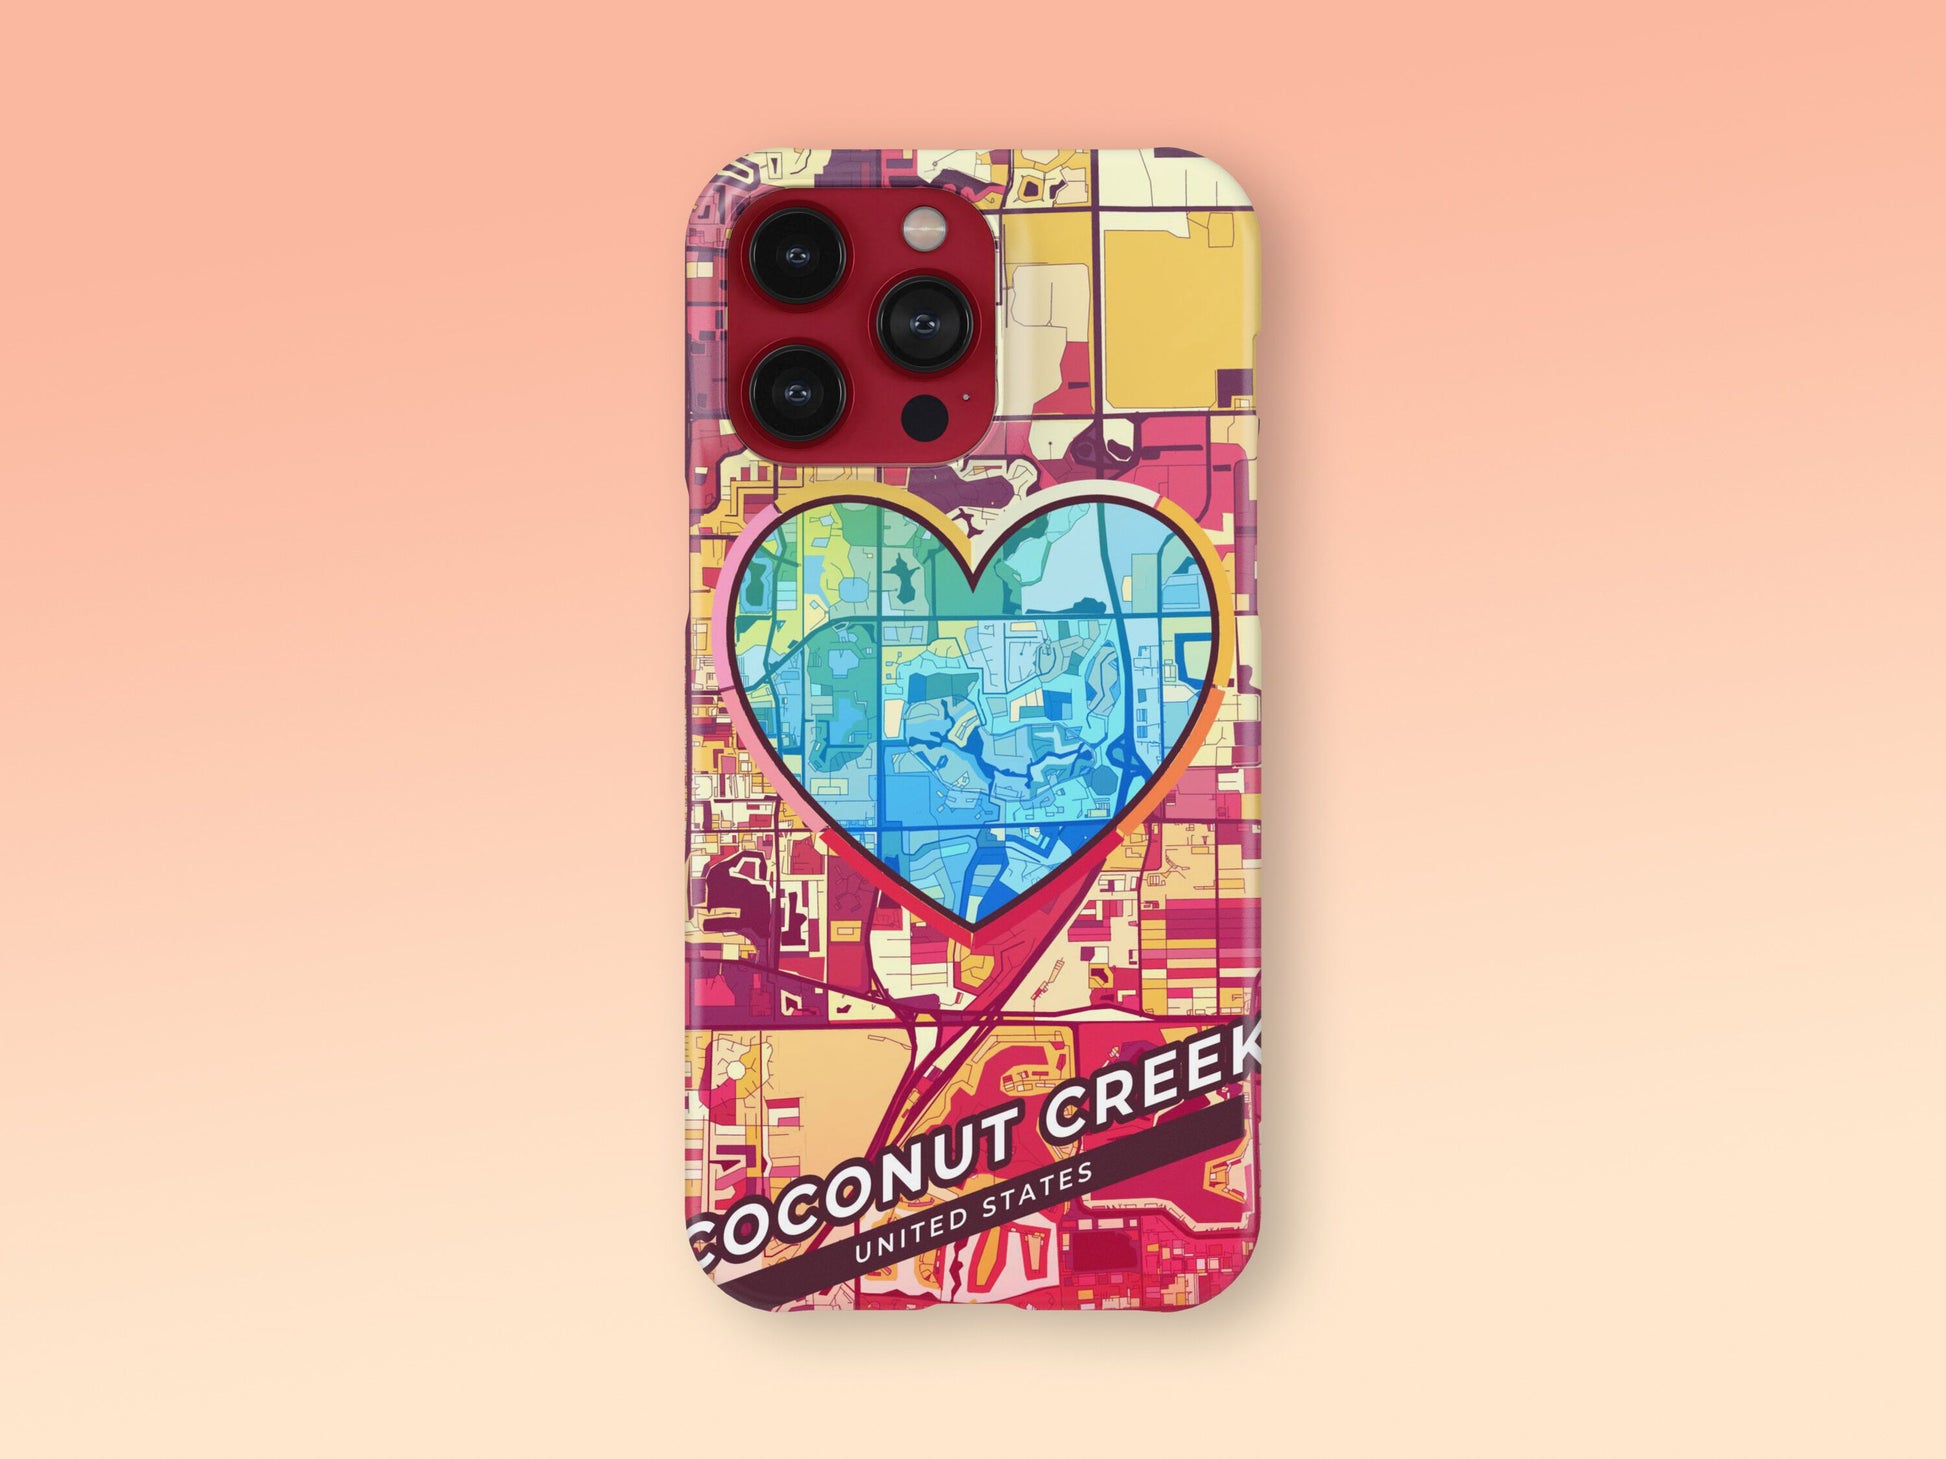 Coconut Creek Florida slim phone case with colorful icon. Birthday, wedding or housewarming gift. Couple match cases. 2